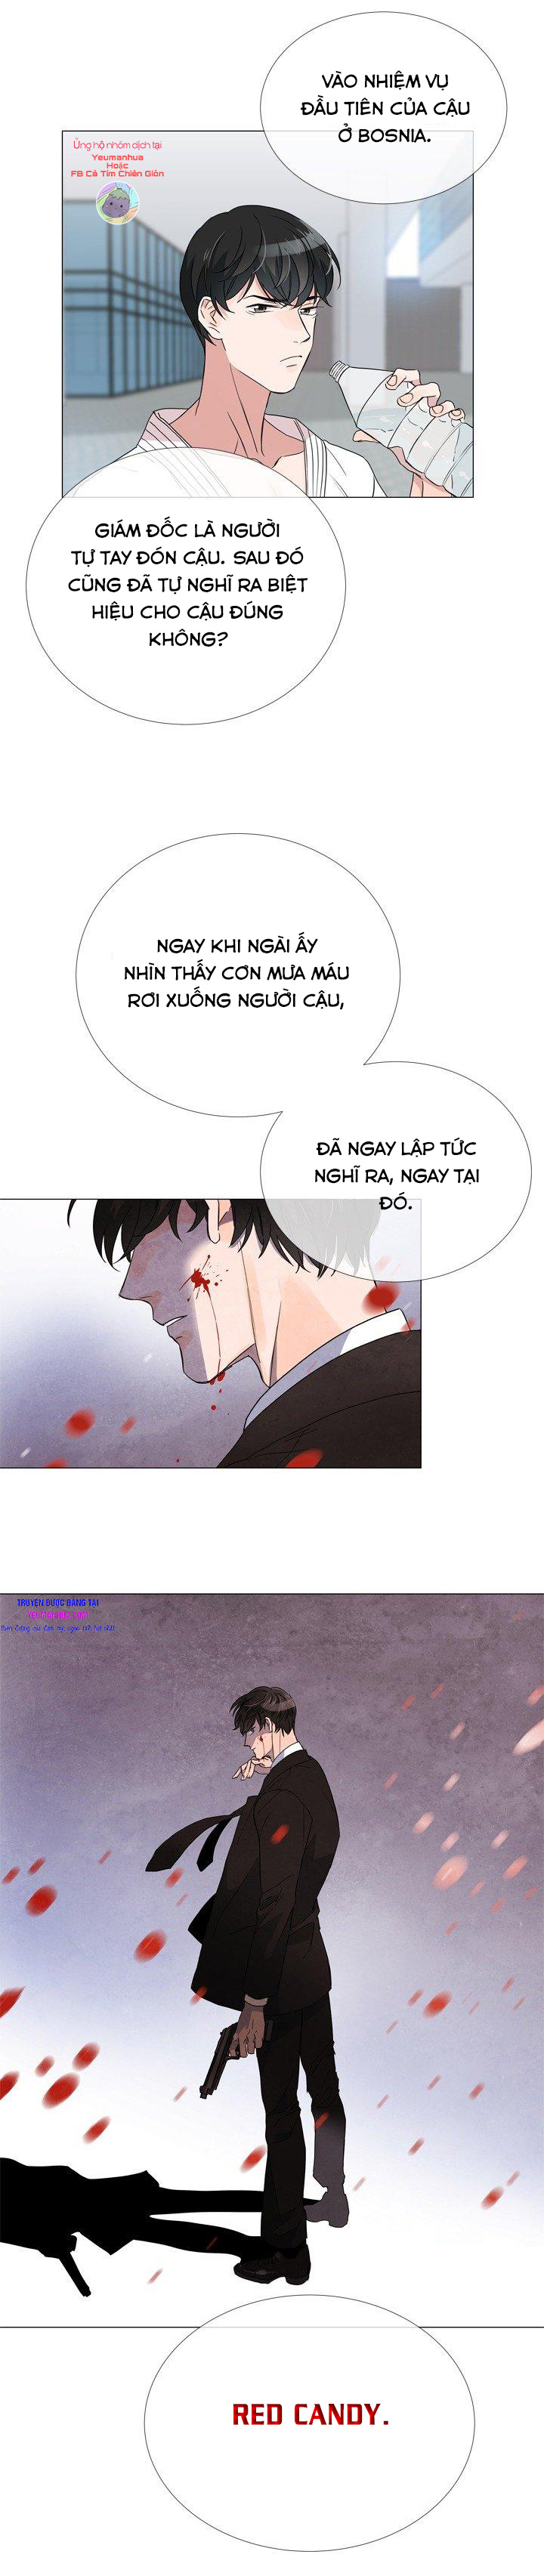 Red Candy Chapter 1 - Trang 10